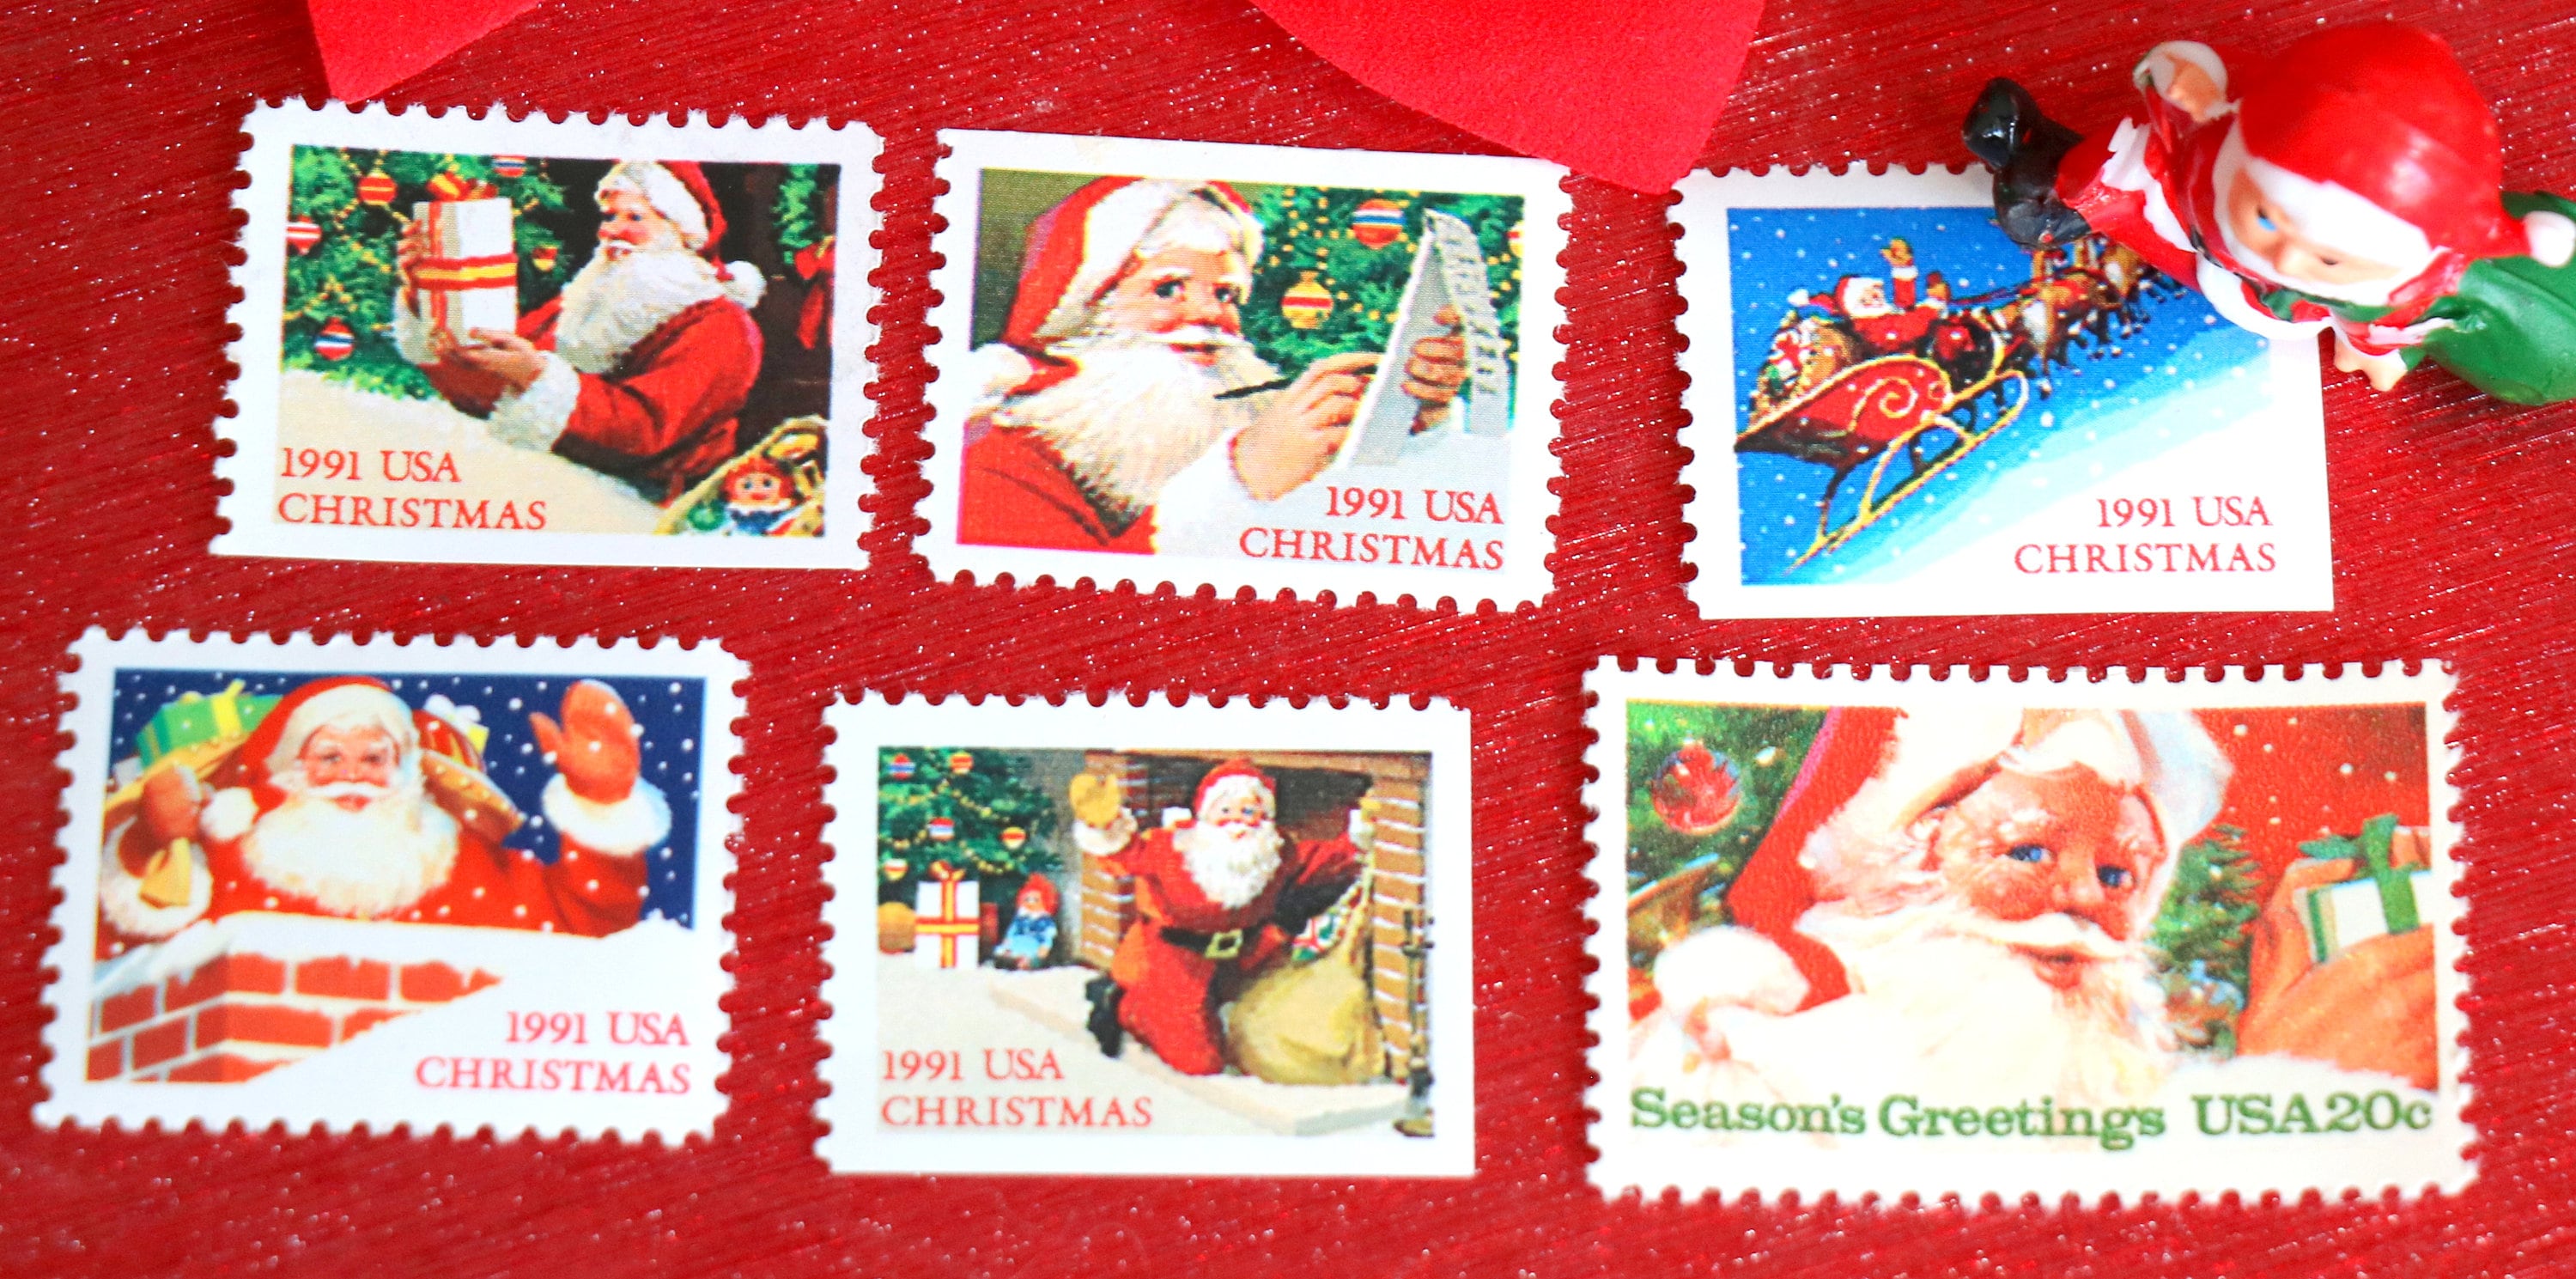 Santa and Wreath Christmas Holiday Vintage Postage, 10 Sets Marketplace  Holiday Postage Stamps by undefined